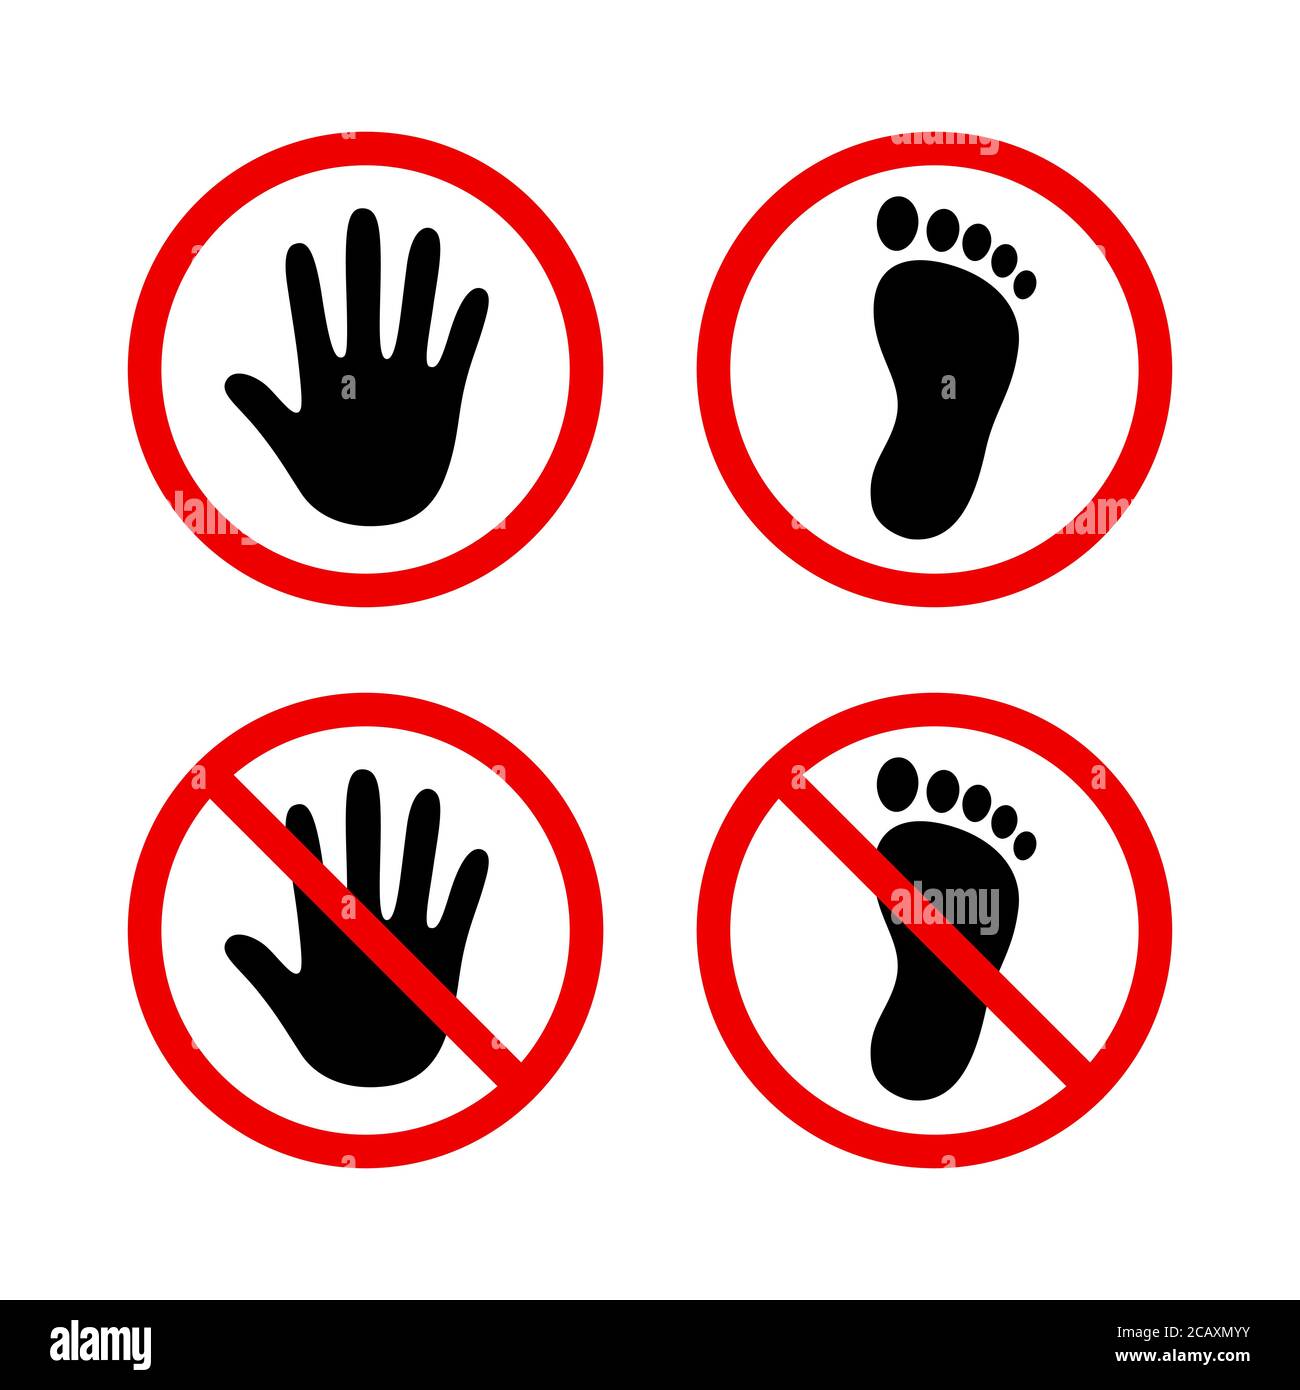 Human hand and foot in red circle, stop sign, do not touch, no walking. Simple black silhouette icons, vector illustration set. Stock Vector